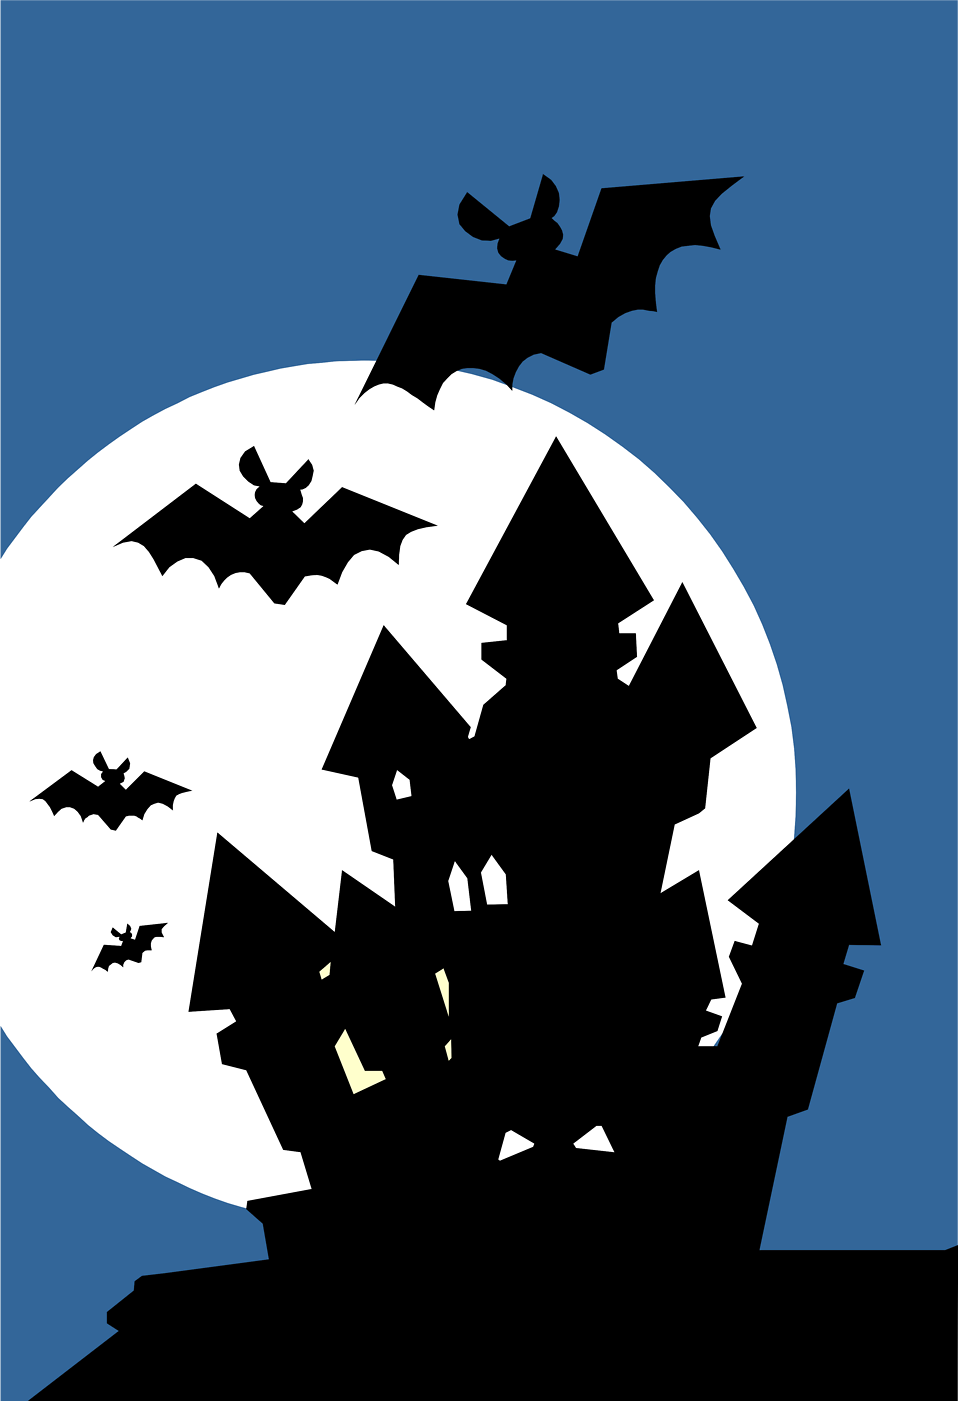 haunted house clipart